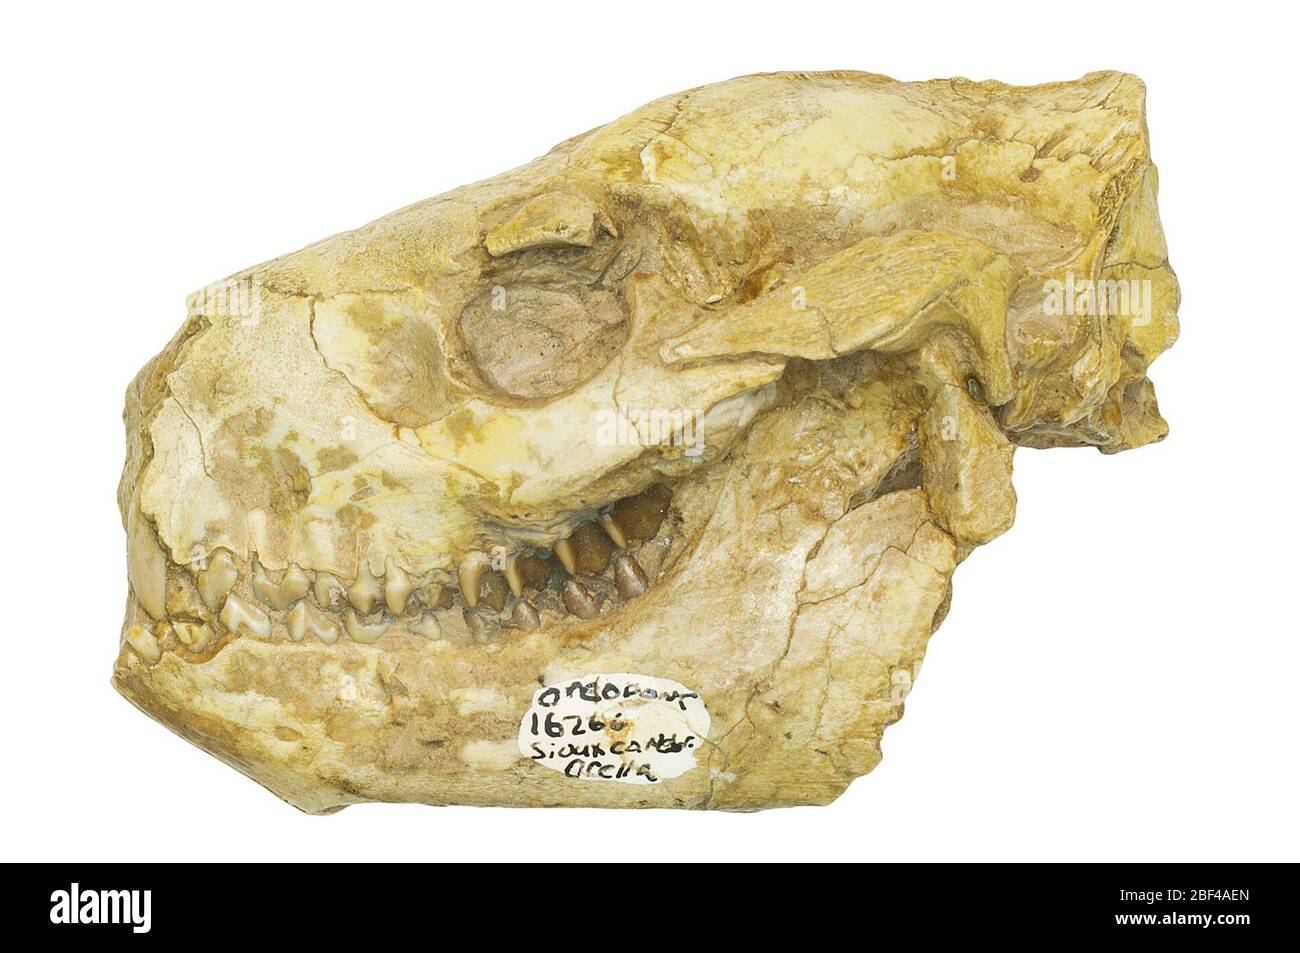 Oreodont. This object is part of the Education and Outreach collection, some of which are in the Q?rius science education center and available to see.Cenozoic - Paleogene - Oligocene114 Jan 2020Lower Brule Stock Photo